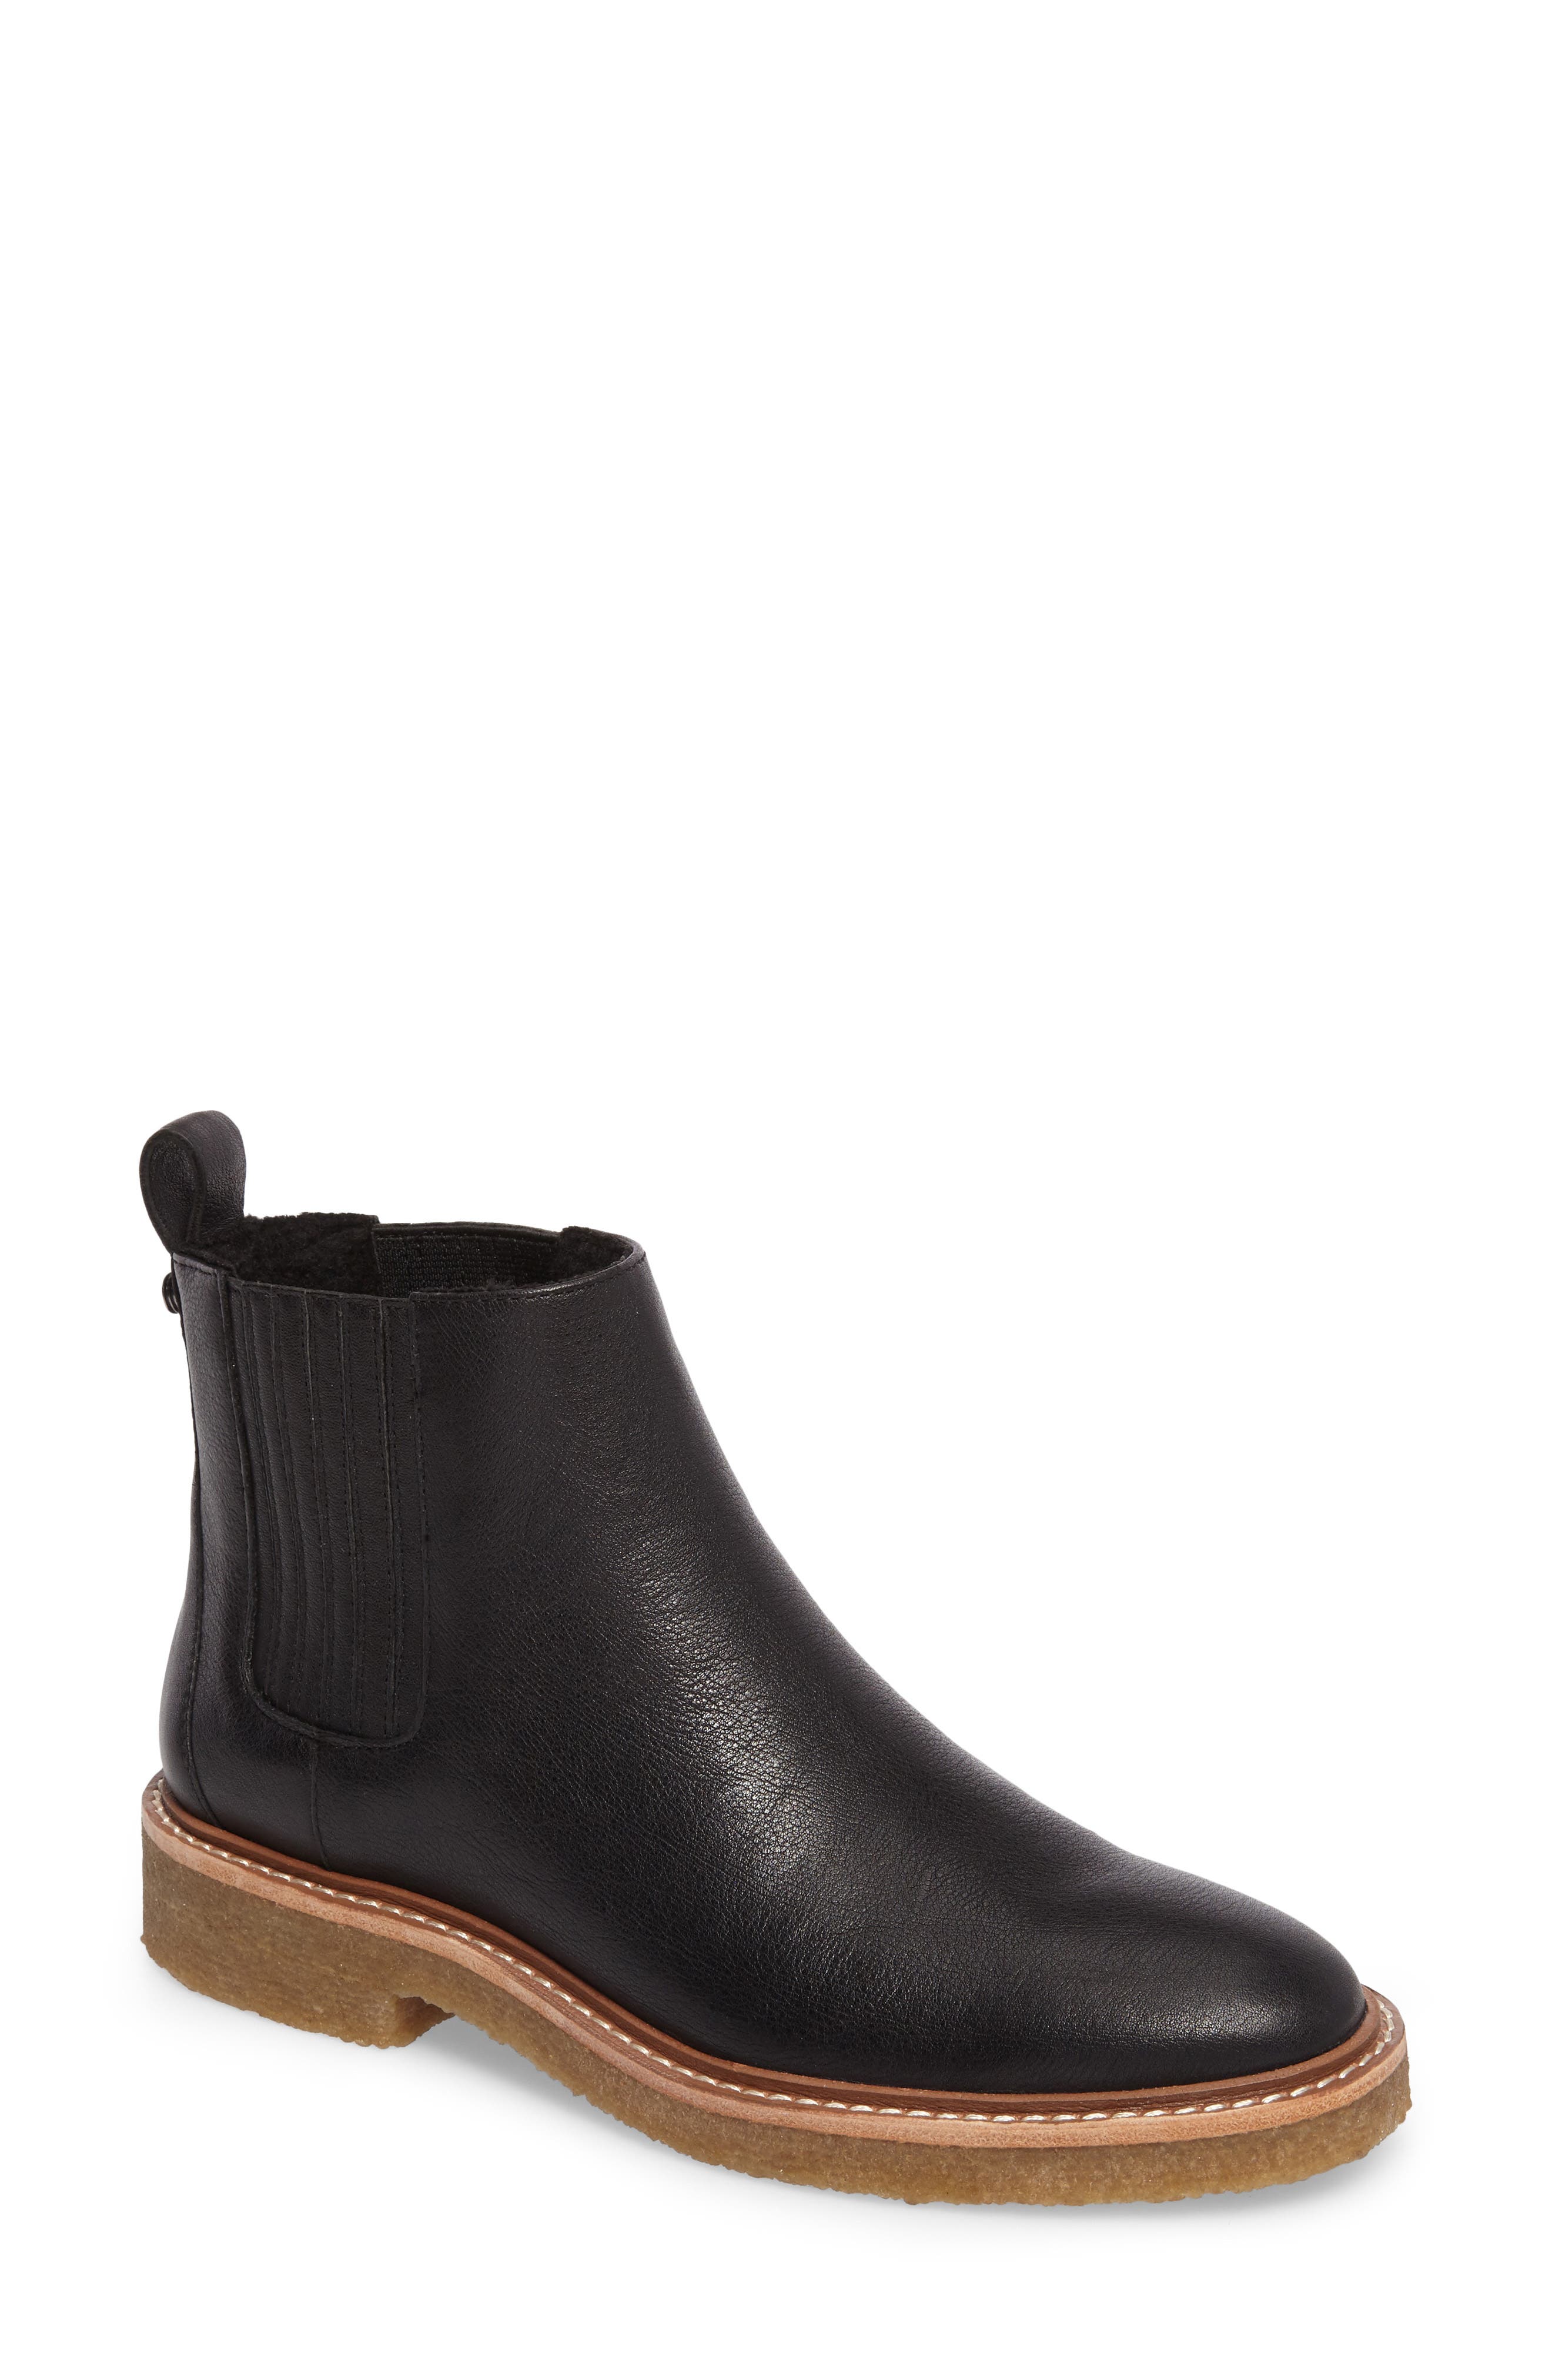 shearling lined chelsea boots